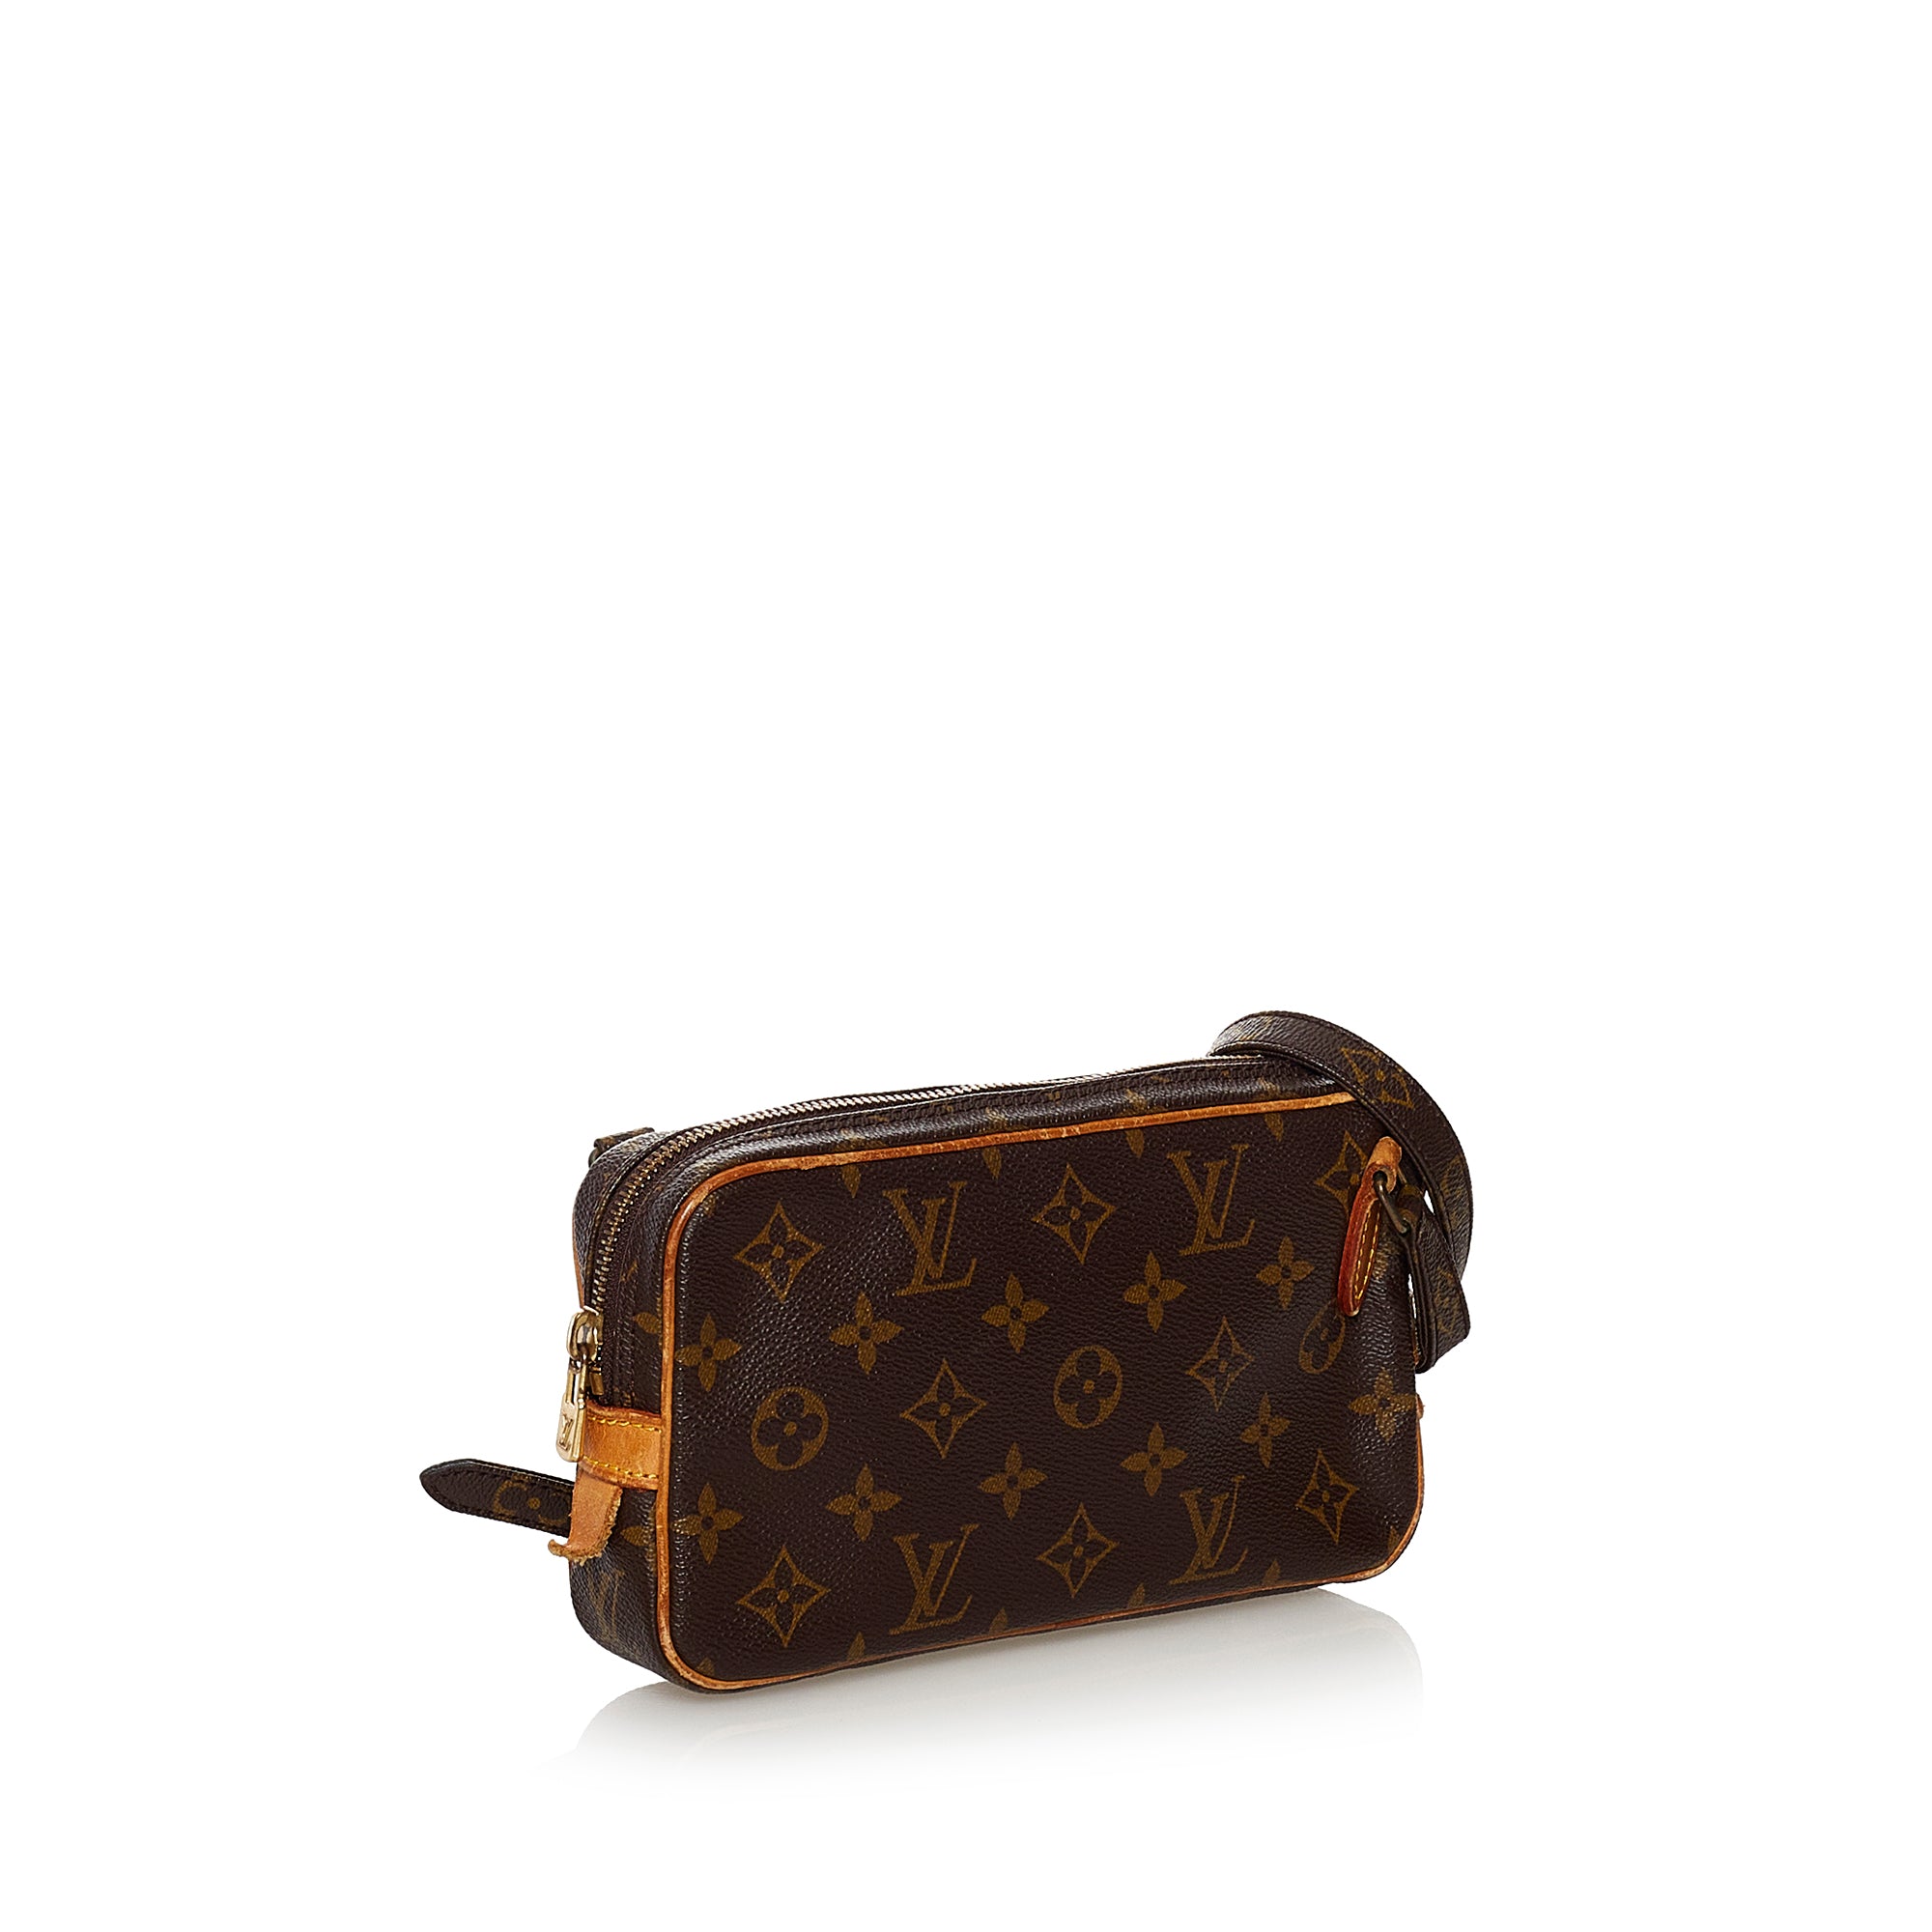 Louis Vuitton Marly Bandouliere Monogram Canvas Crossbody Bag on SALE